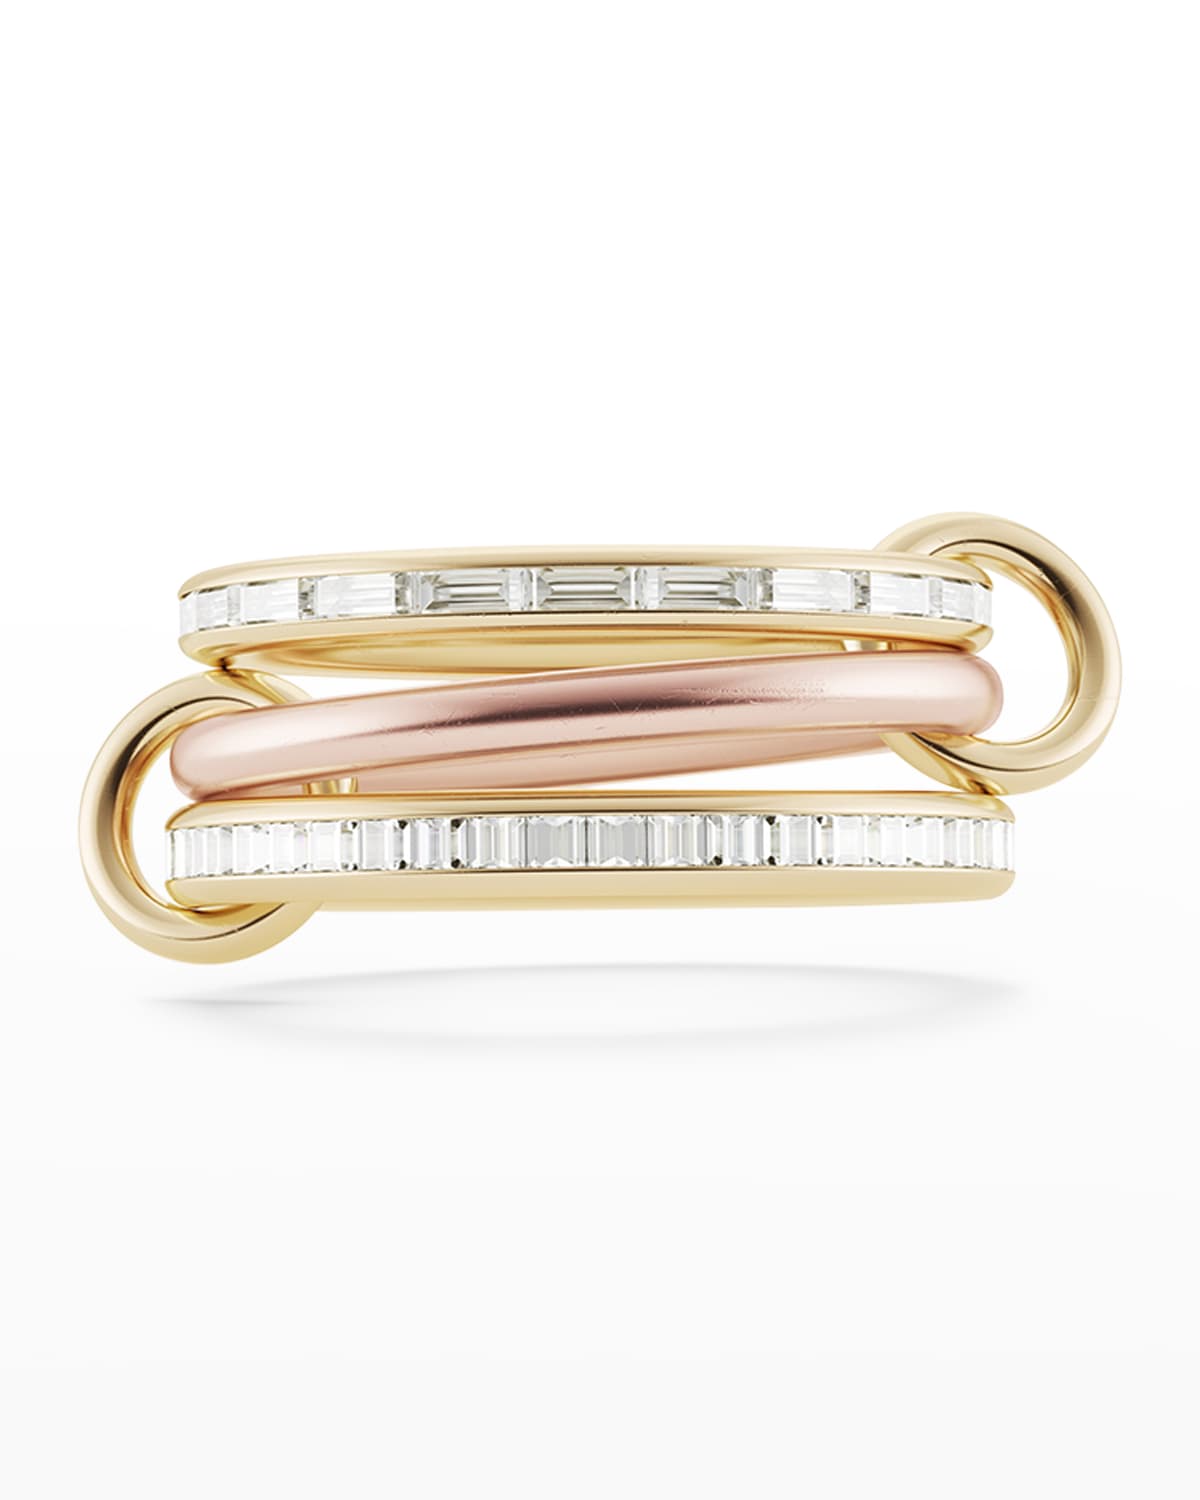 Yellow Gold and Rose Gold 3-Linked Ring with Baguette and Carré Diamonds, Size 7